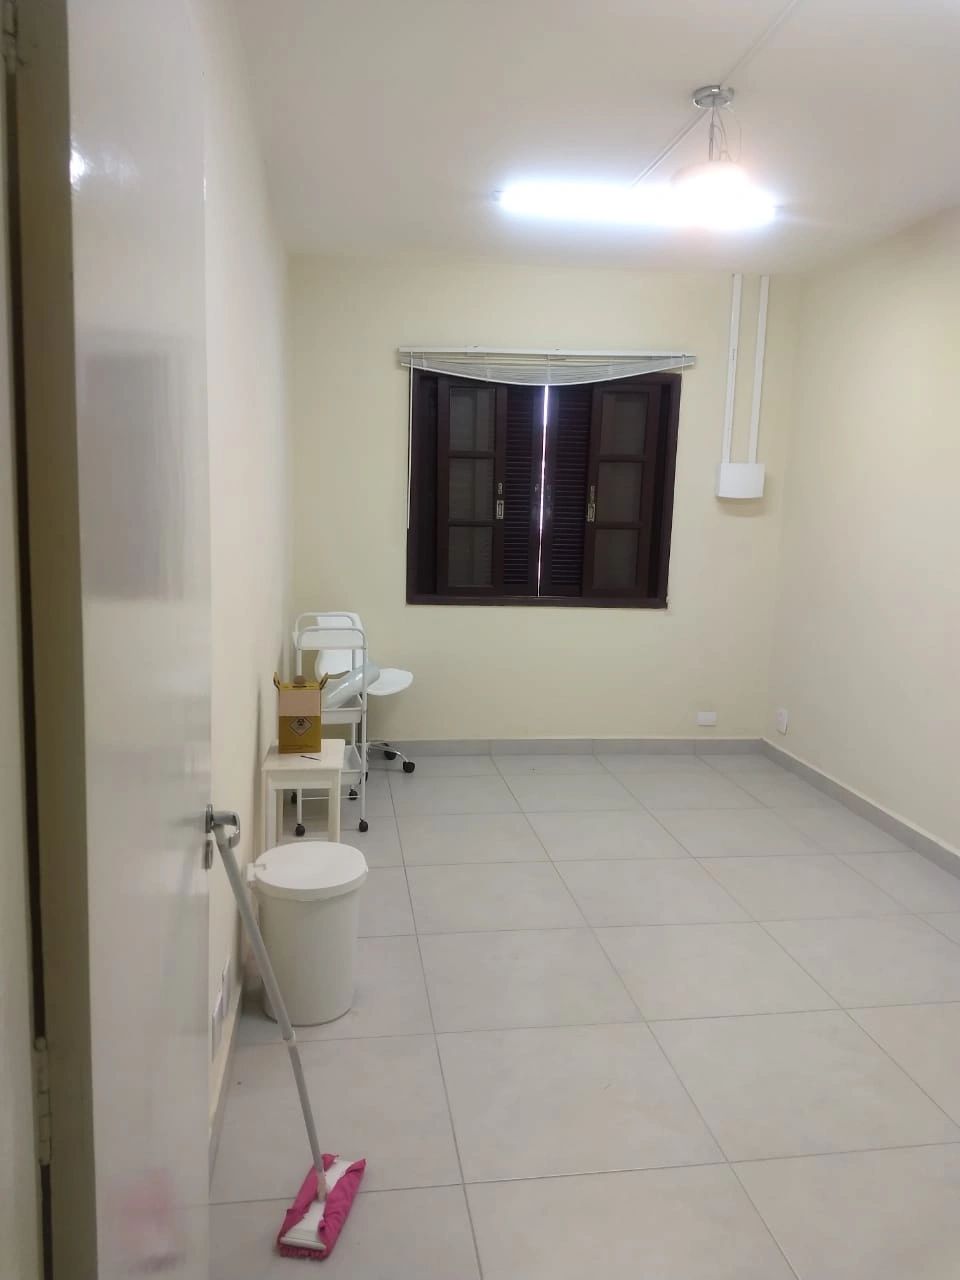 Rooms to Rent in Soweto from R 800